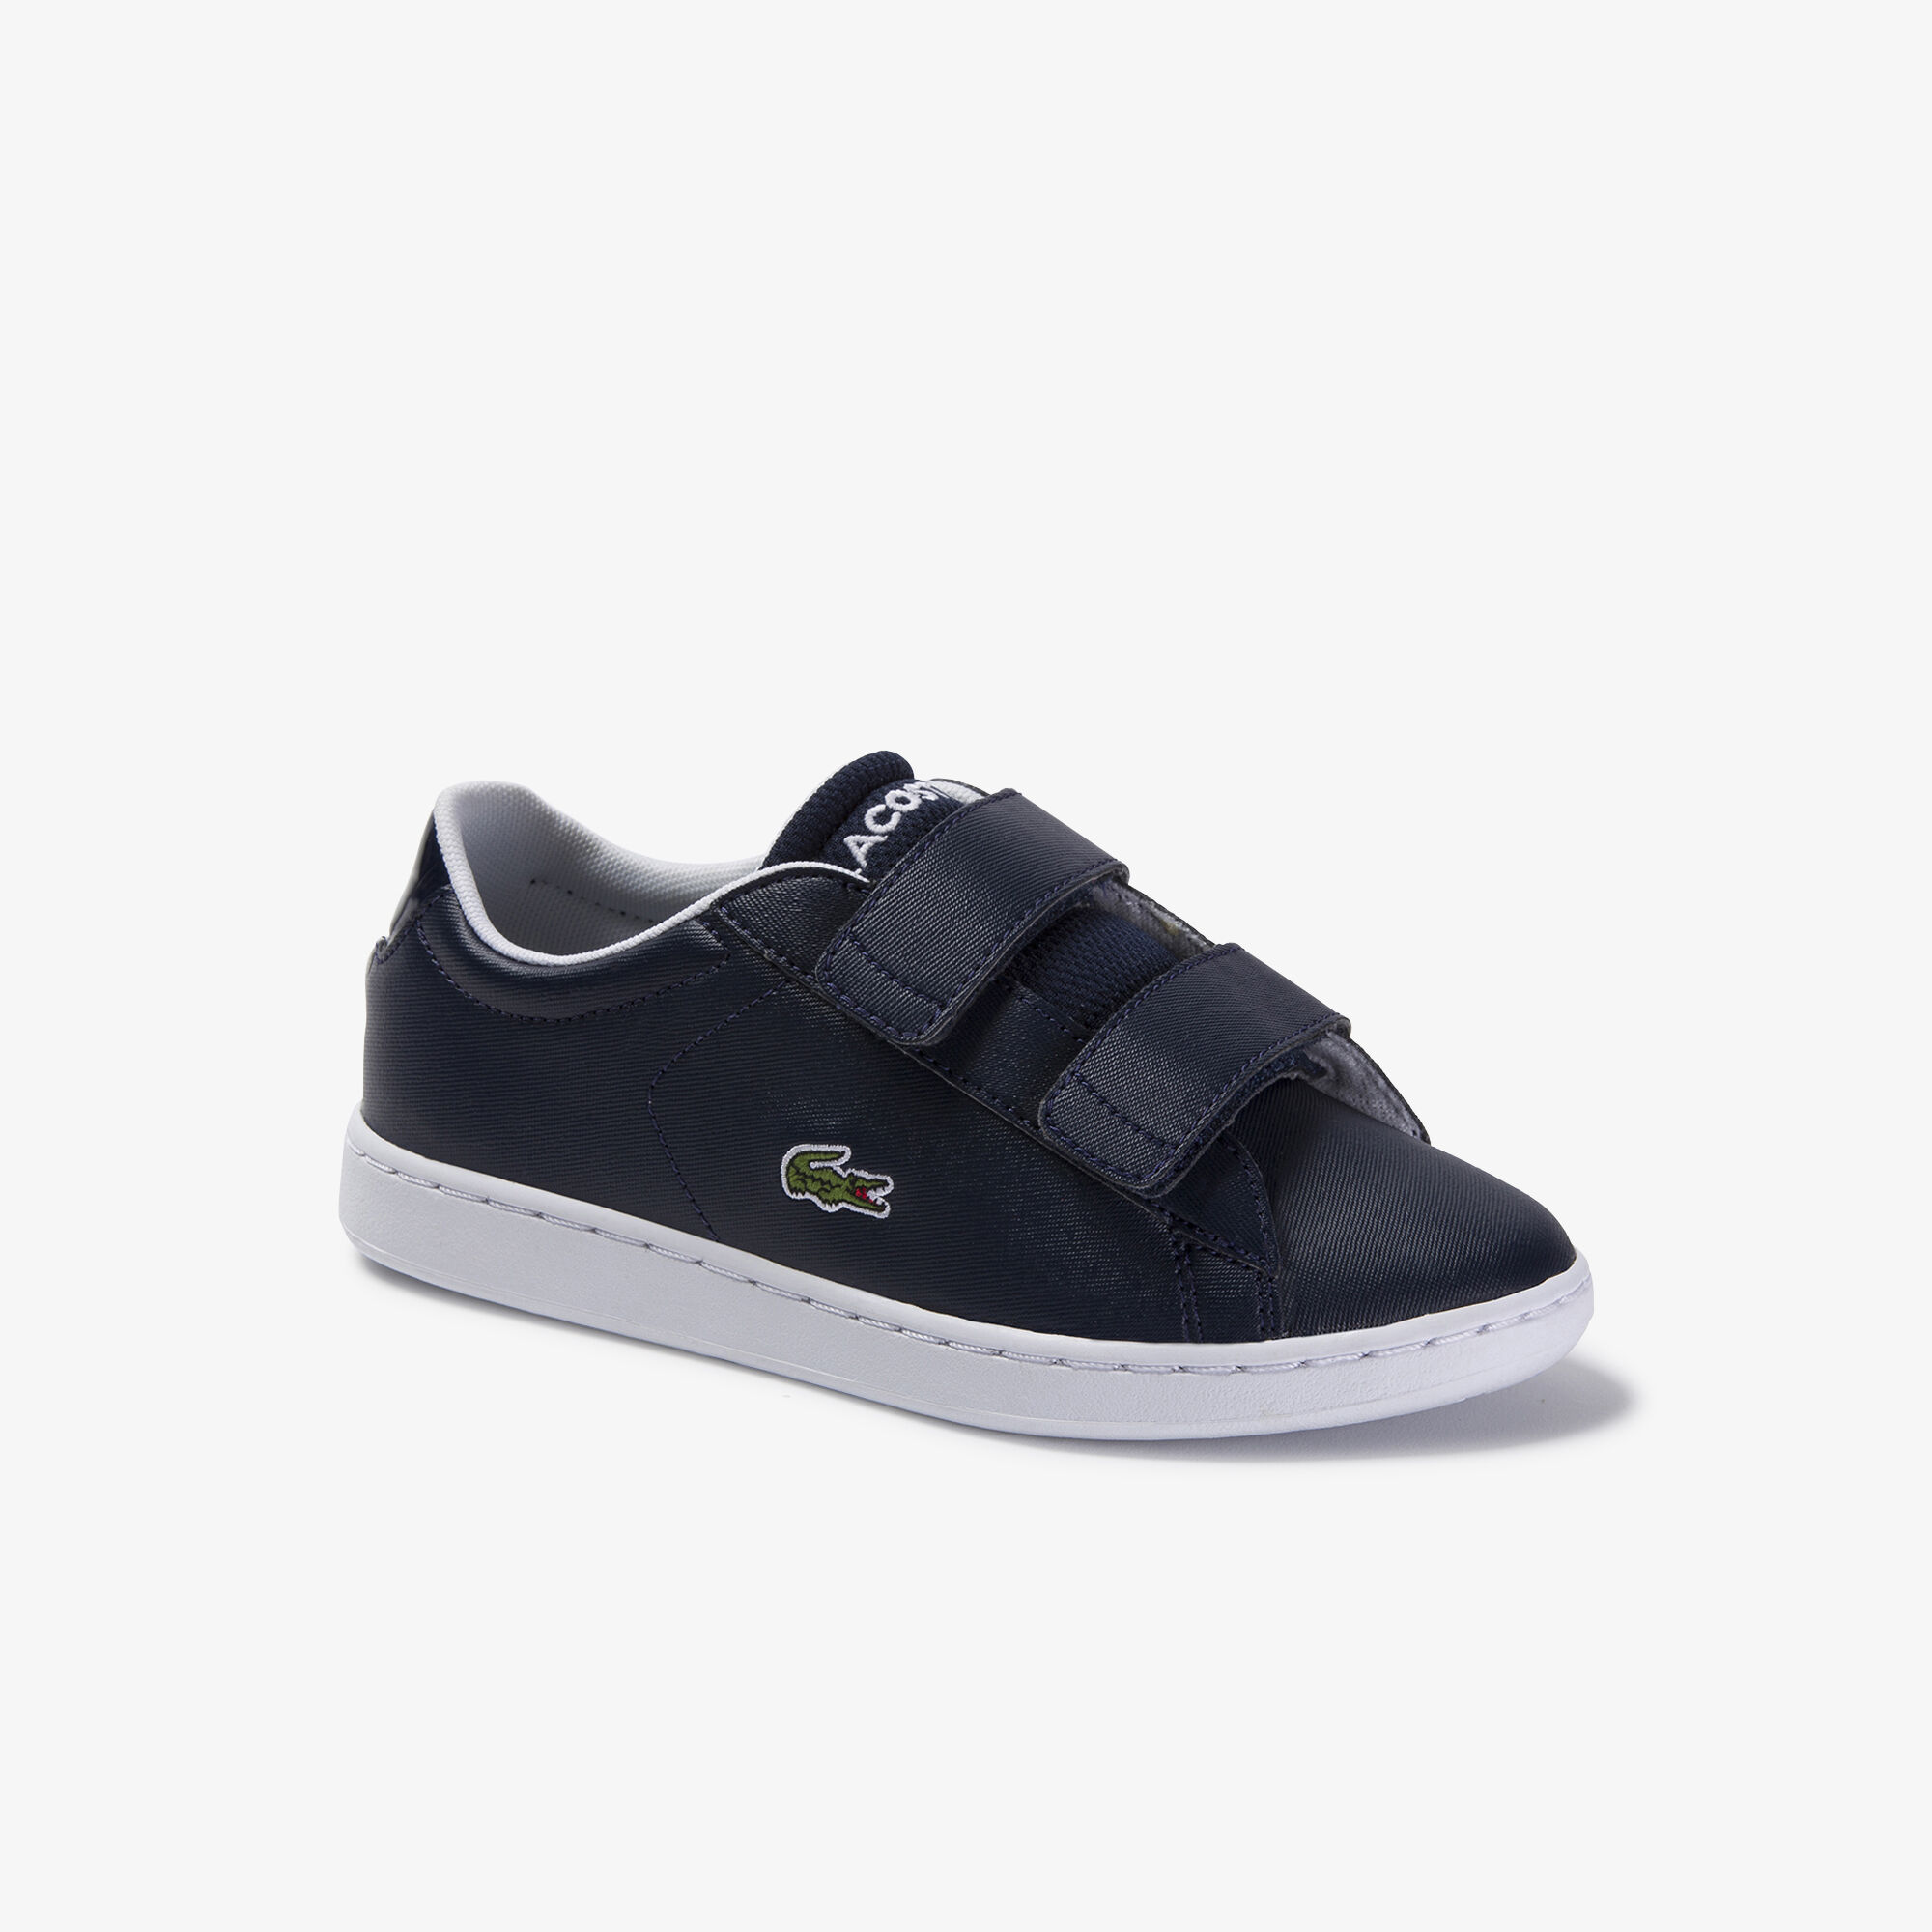 Children's Carnaby Evo Strap Tonal Synthetic Sneakers